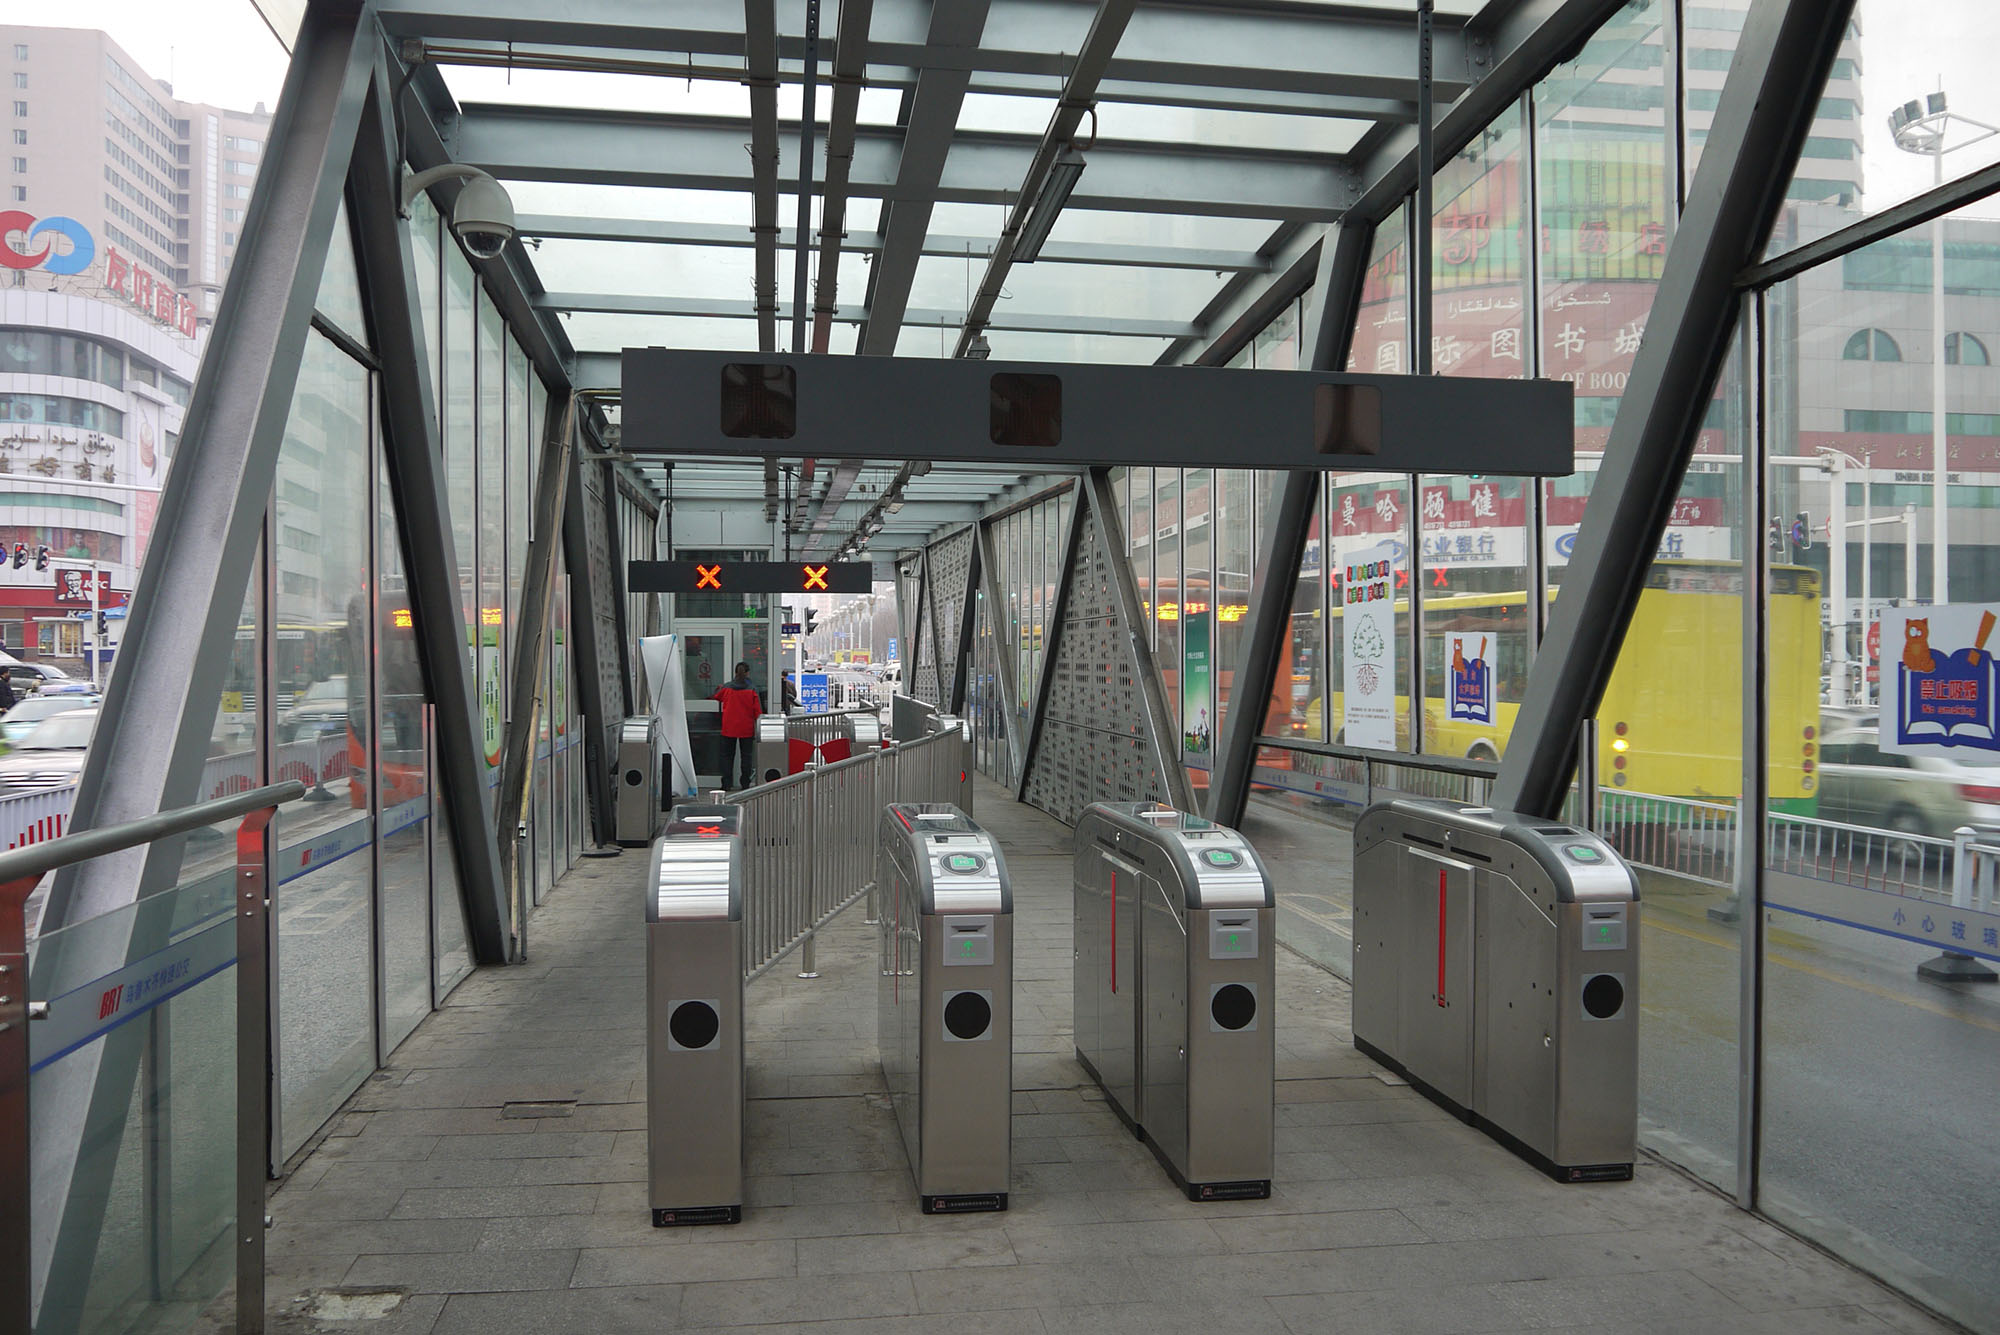 Fig. 18.6 Urumqi, China, streamlines customer flow by offsetting the gates and making them unidirectional. Image